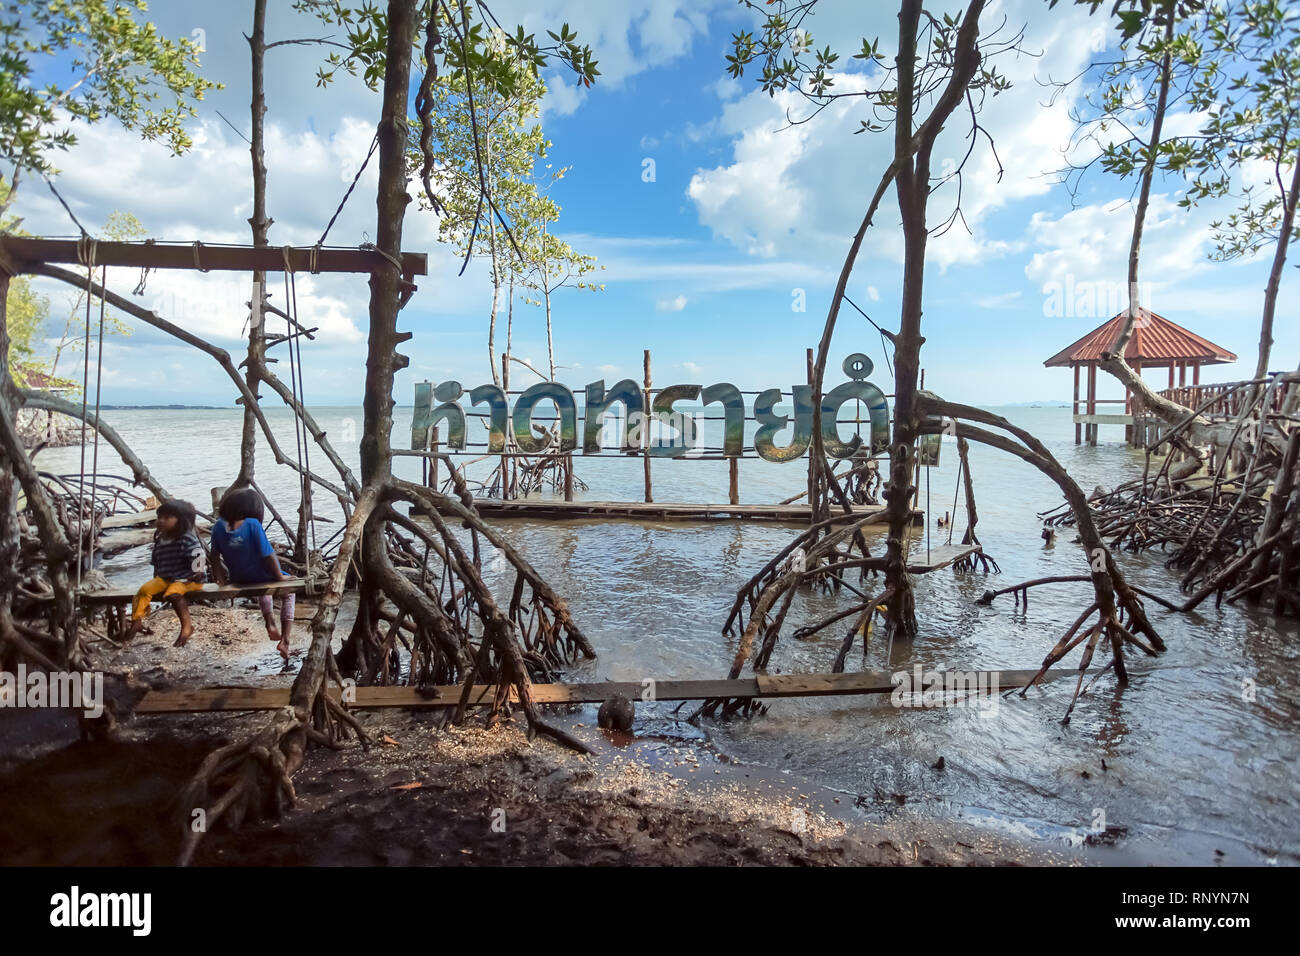 Trad, Thailand - December 01, 2018: Check in point of black sand beach with Thai post 'Had Sii Dam' in Trad province, Thailand. This place is famous m Stock Photo